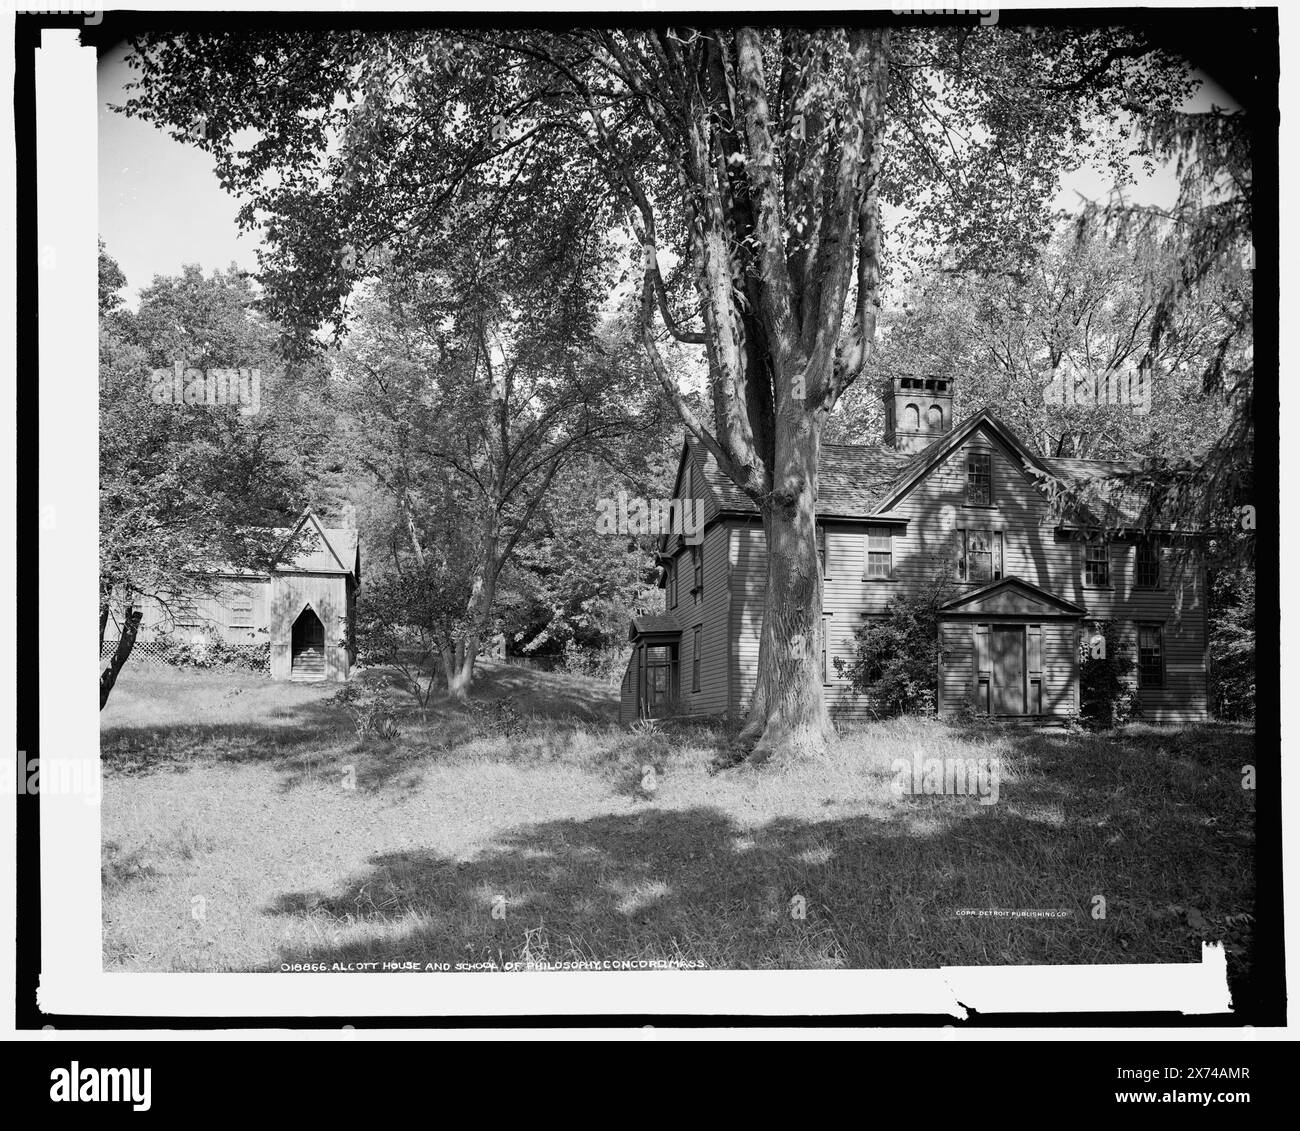 Alcott House Orchard House and School of Philosophy, Concord, Mass., Detroit Publishing Co. No. 018866., Gift ; State Historical Society of Colorado ; 1949, Dwellings. , Écoles. , États-Unis, Massachusetts, Concord. Banque D'Images